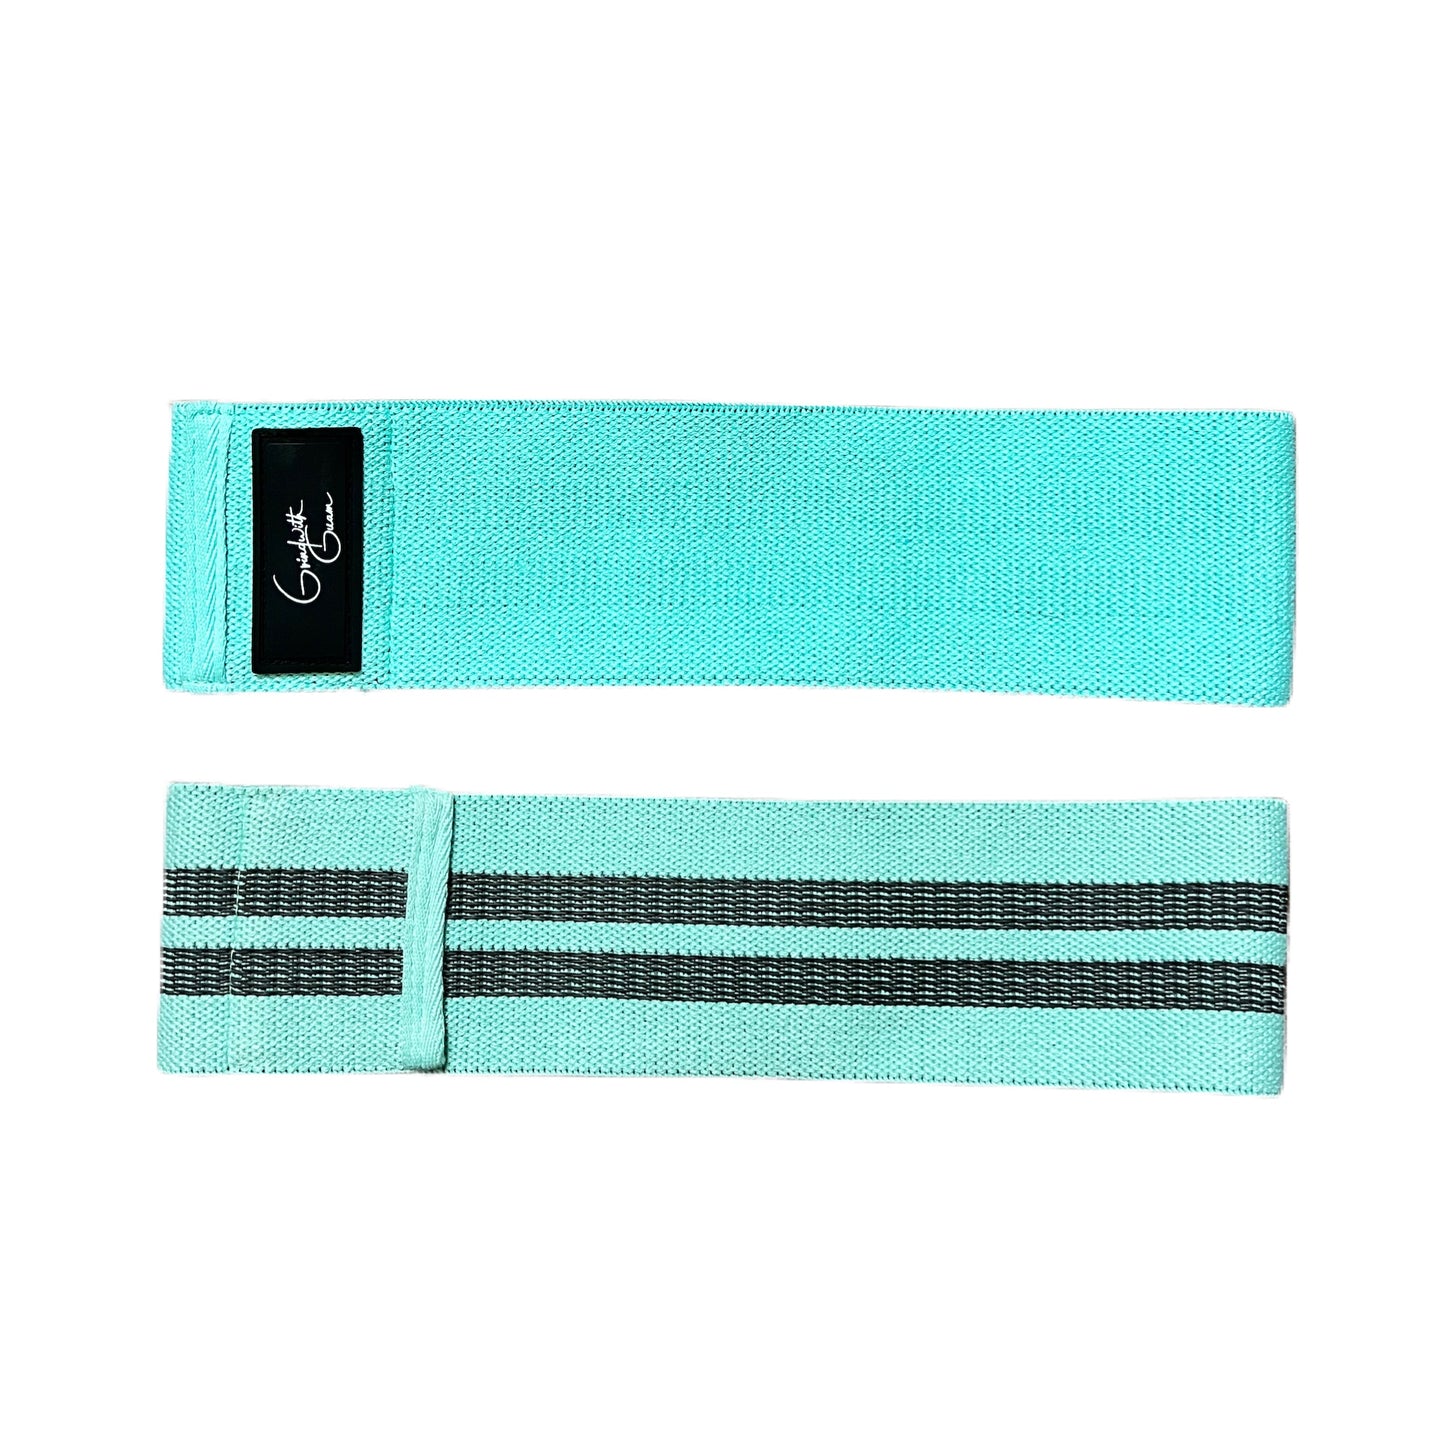 Teal “small” Booty band